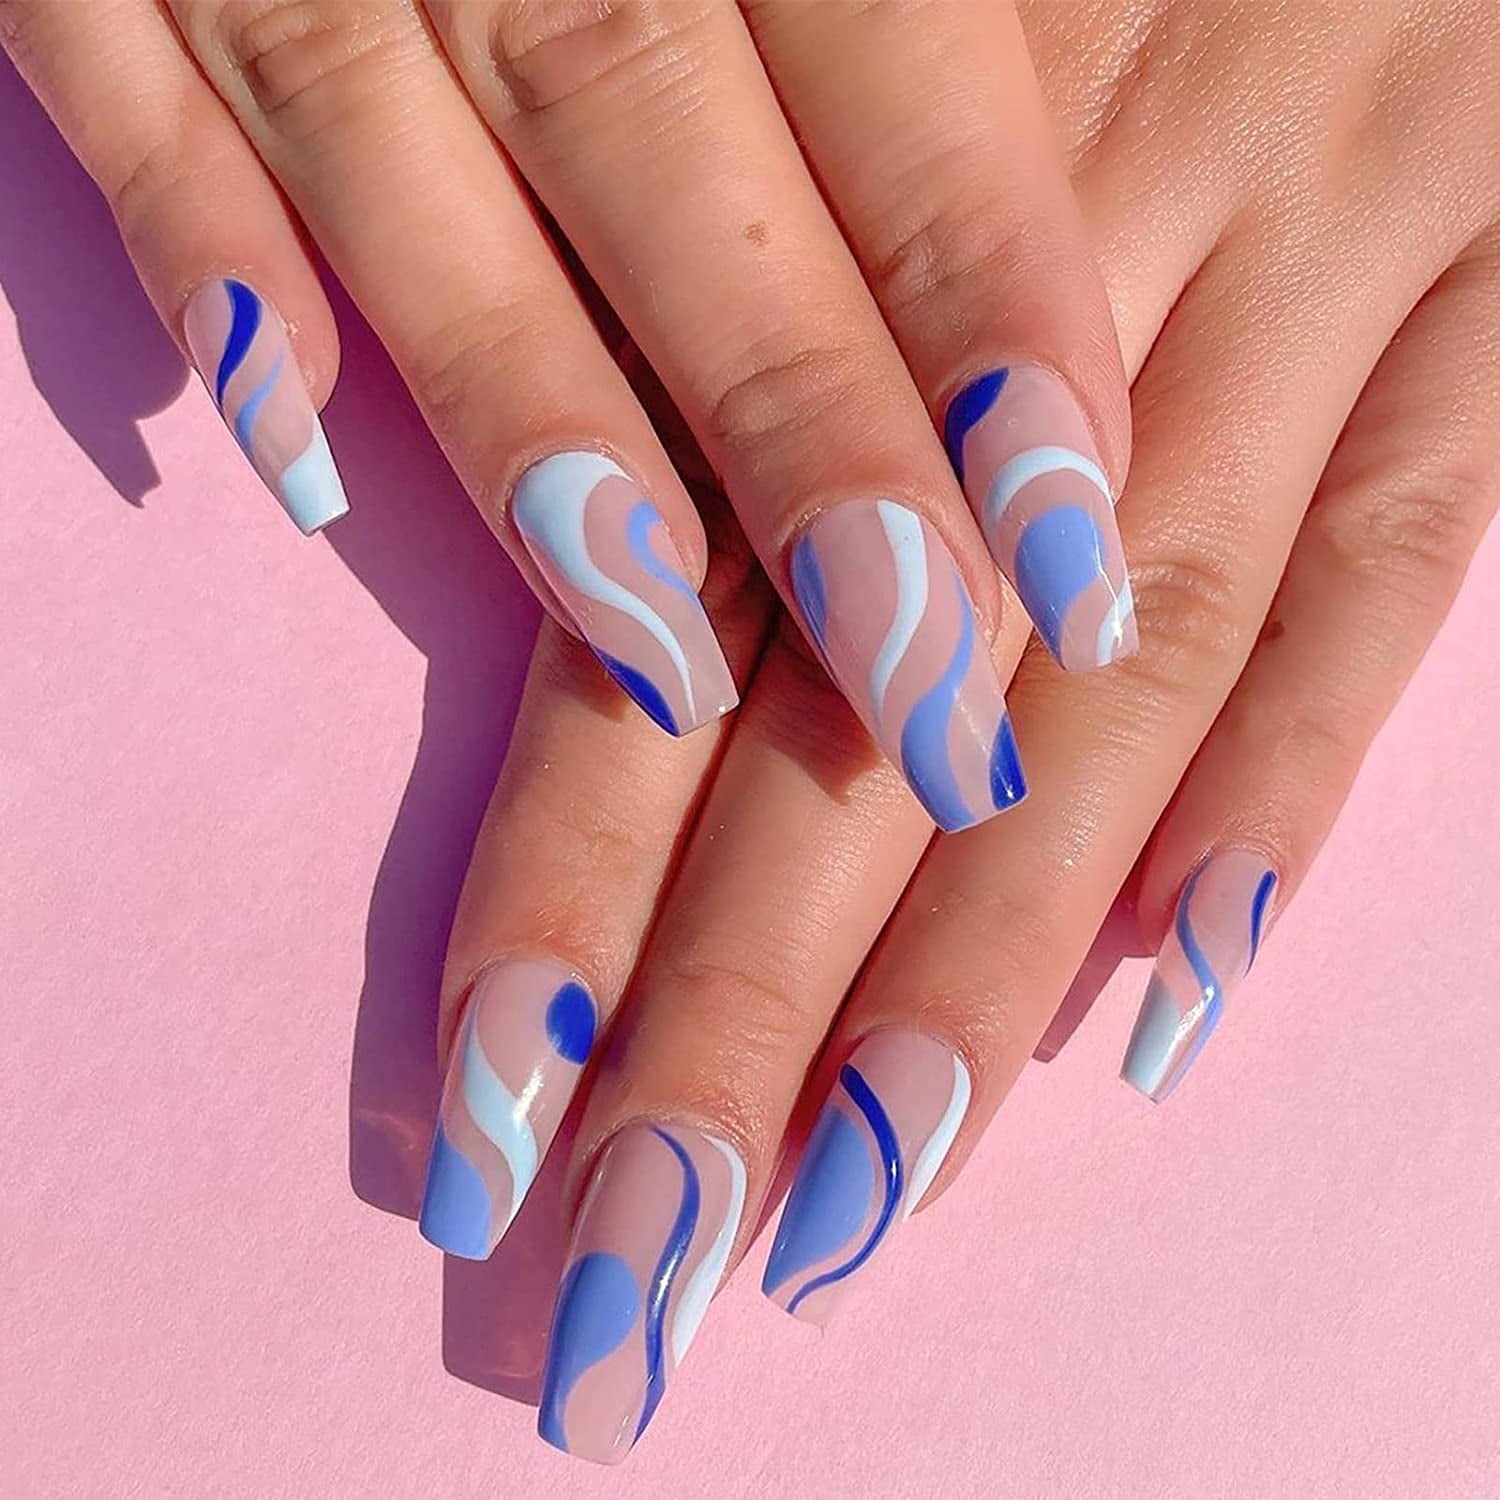 The Best Rhinestone Nail Trends We're Loving for Summer 2022